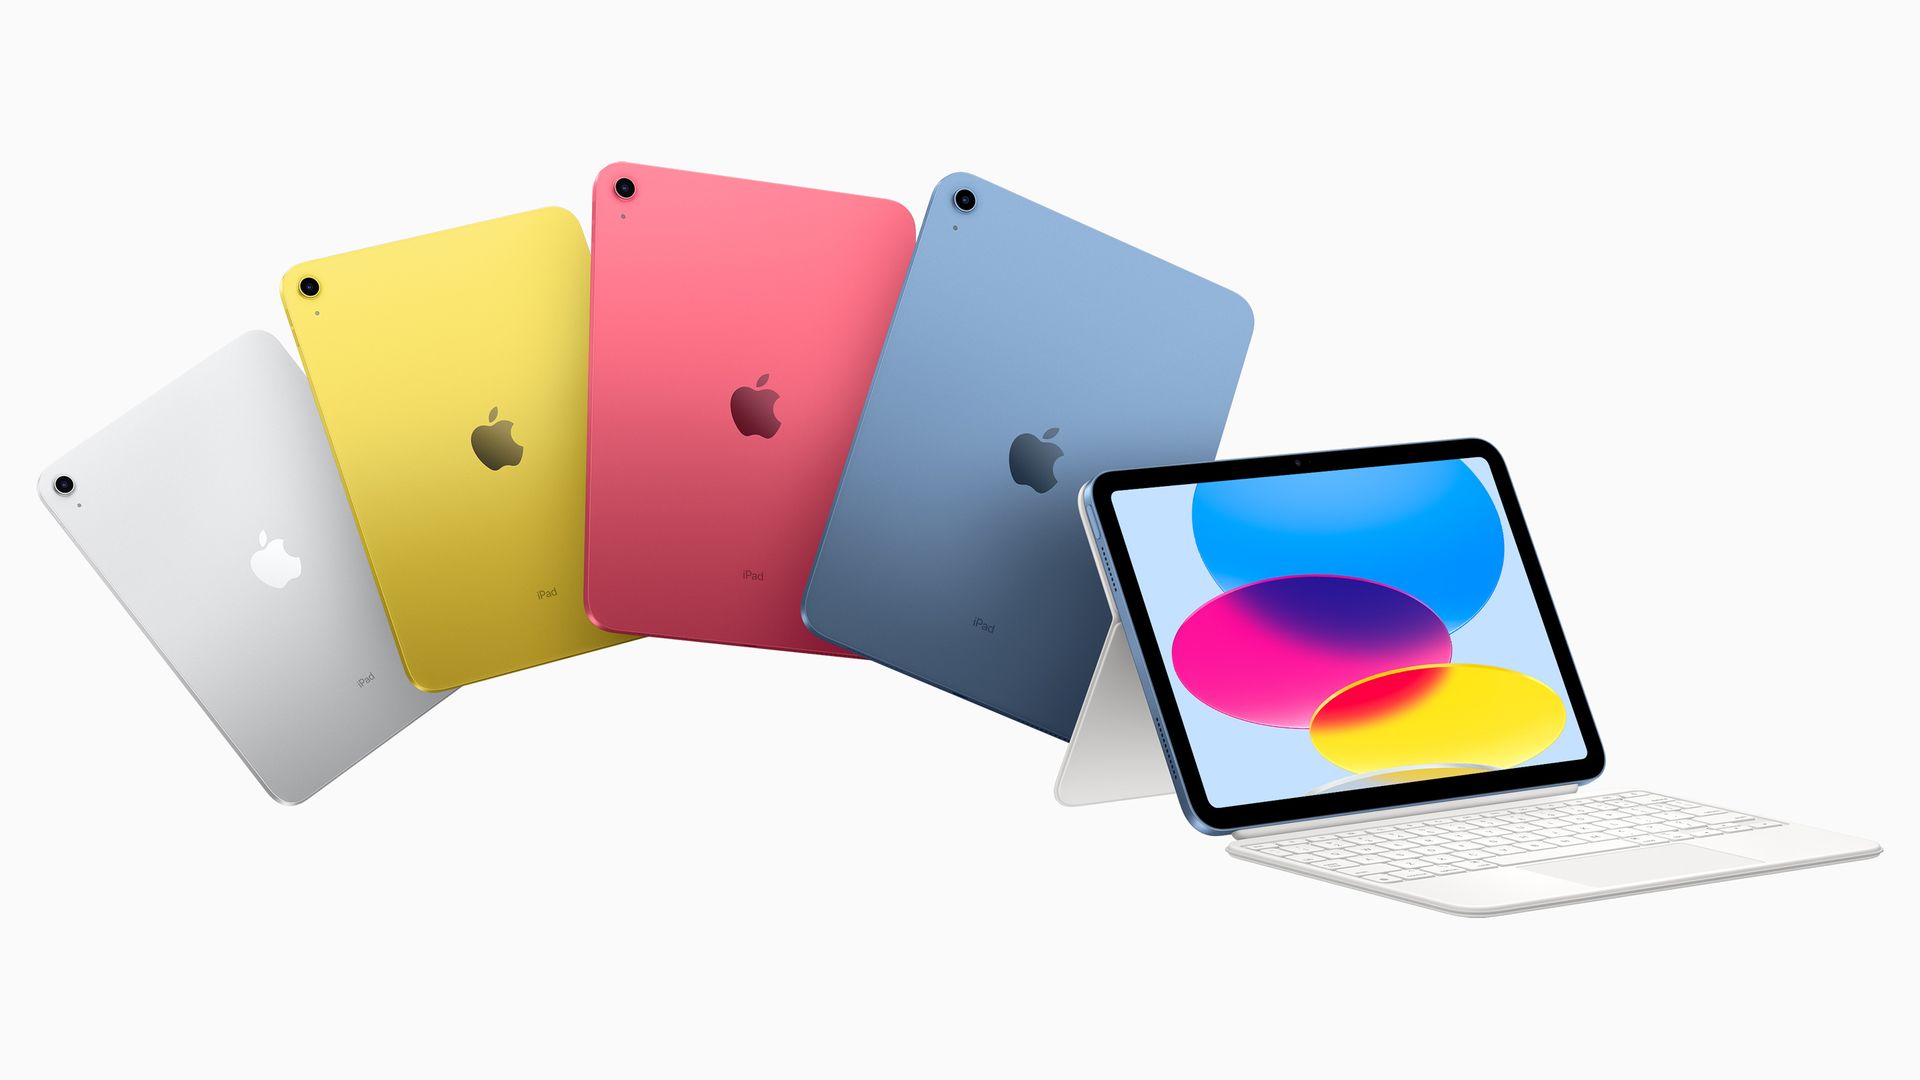 Apple's 10th generation iPad comes in four colors.